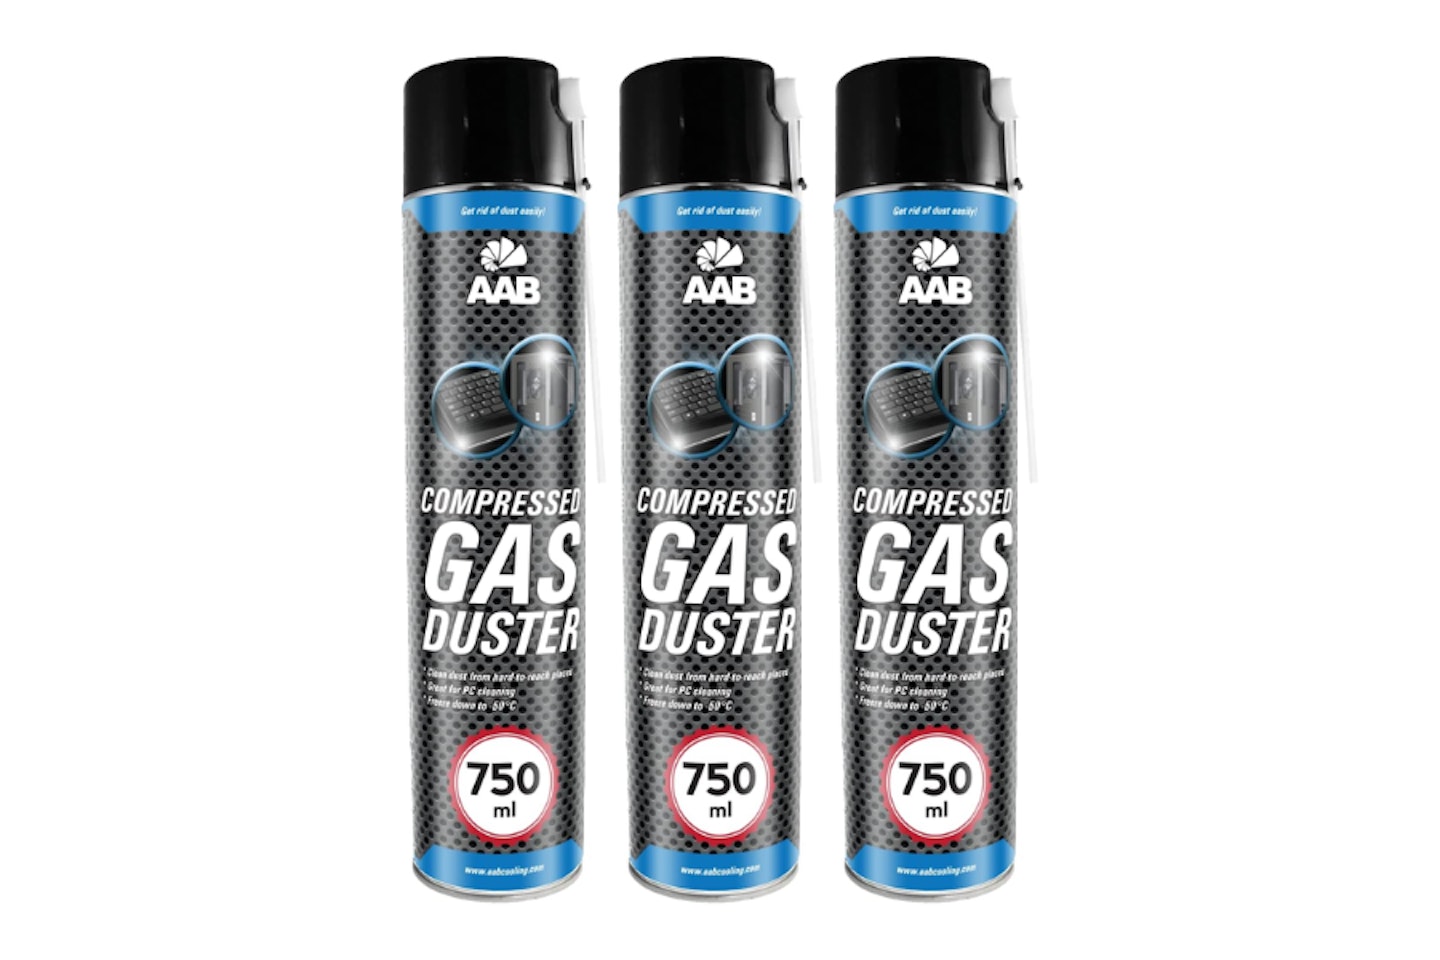 AAB Compressed Gas Duster 750ml x3 - one of the best keyboard cleaner products